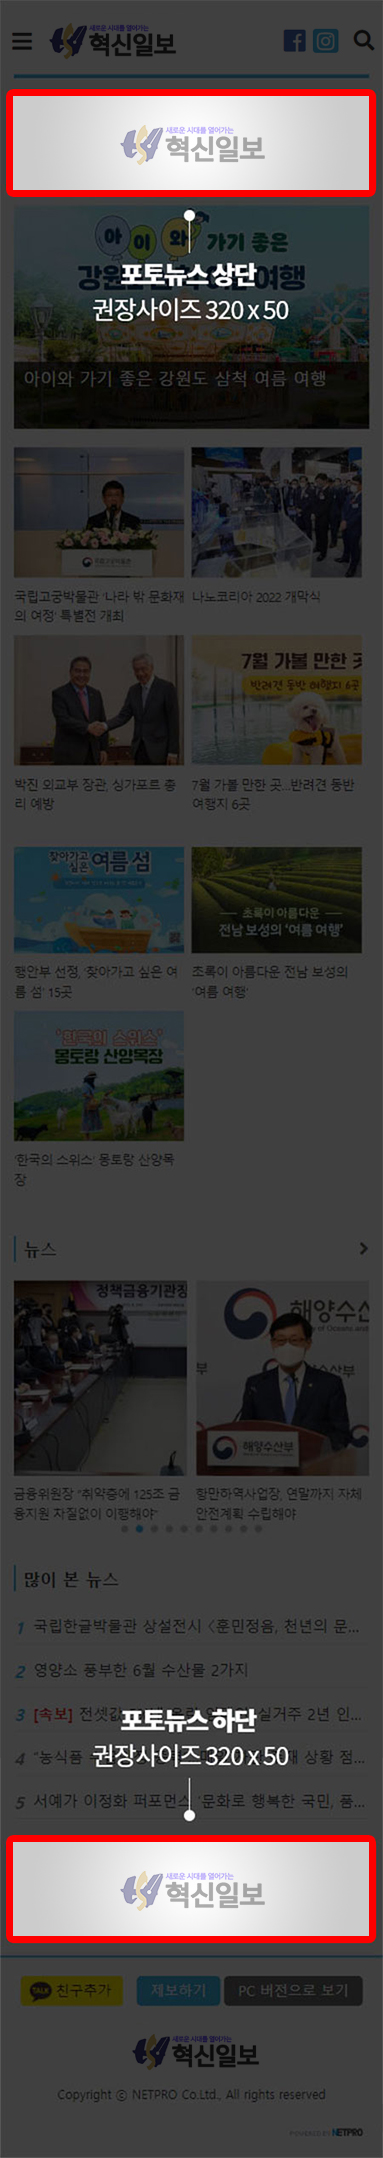 MOBILE 포토뉴스 이미지